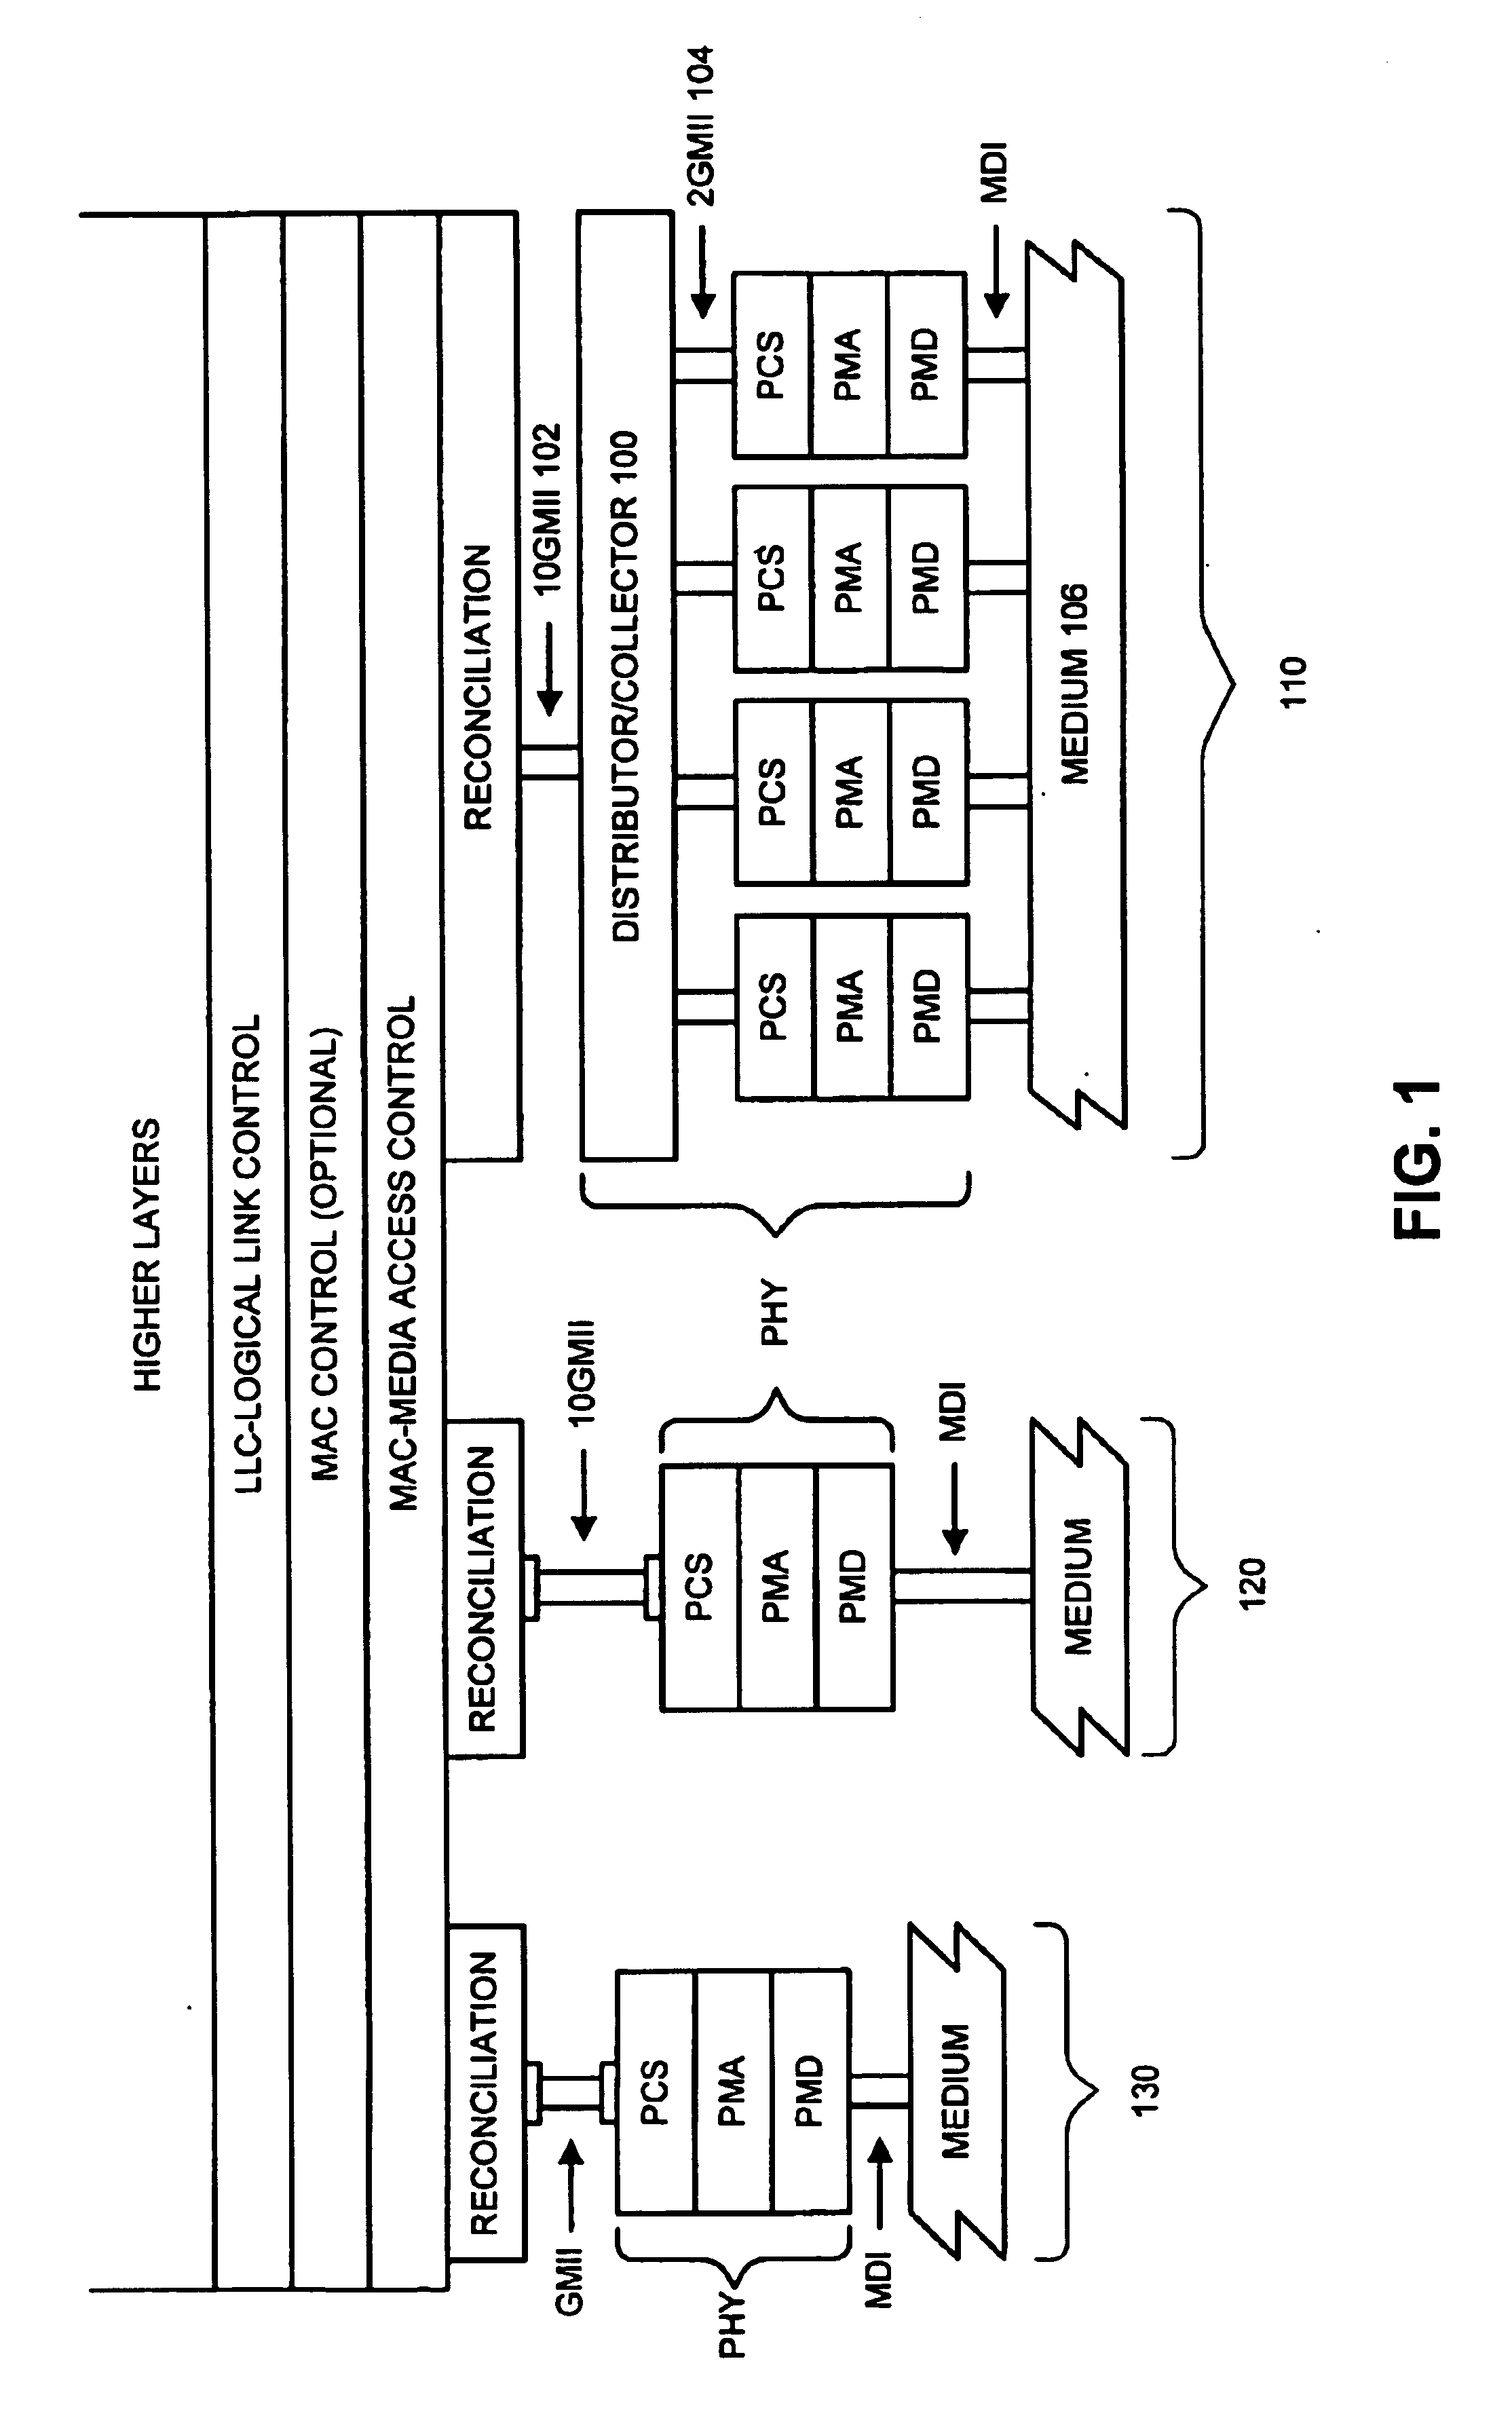 Method and apparatus for a multi-gigabit ethernet architecture